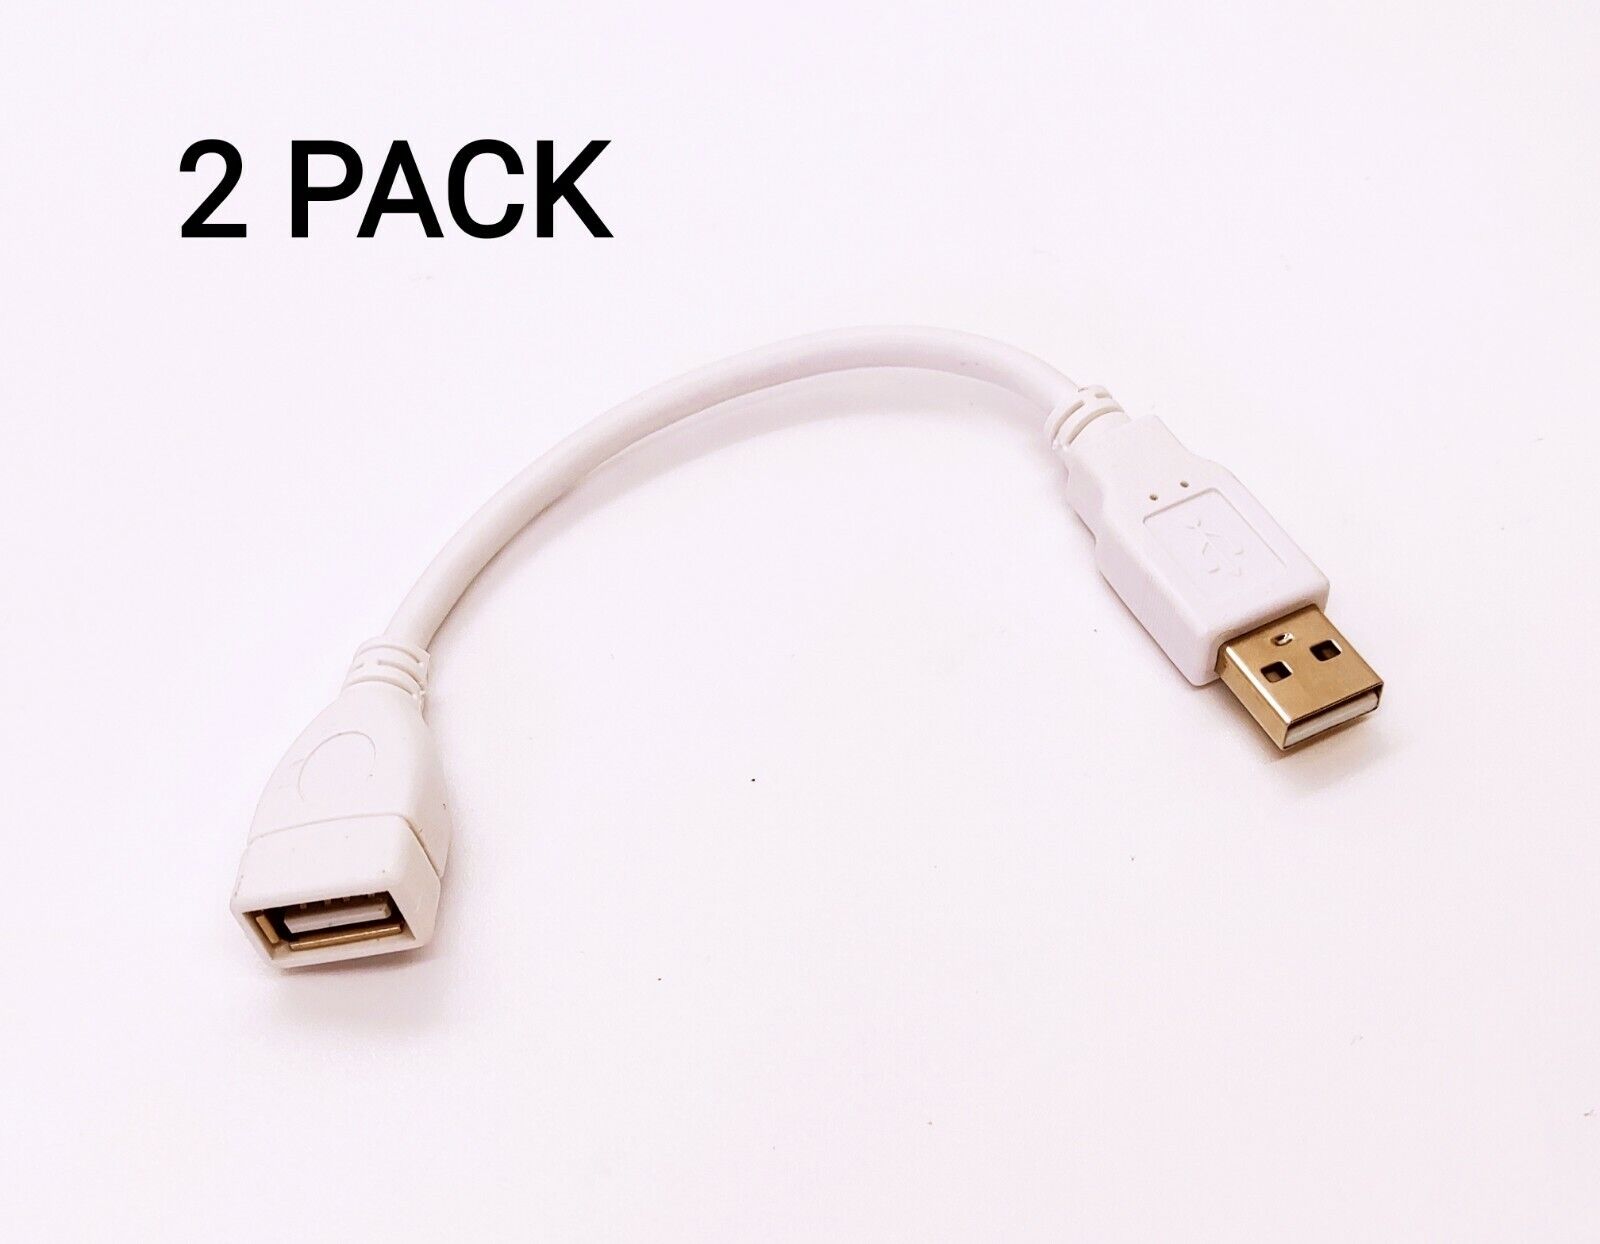 2 Pack  1Ft USB 2.0 A Male / A Female Extension Cable White Color